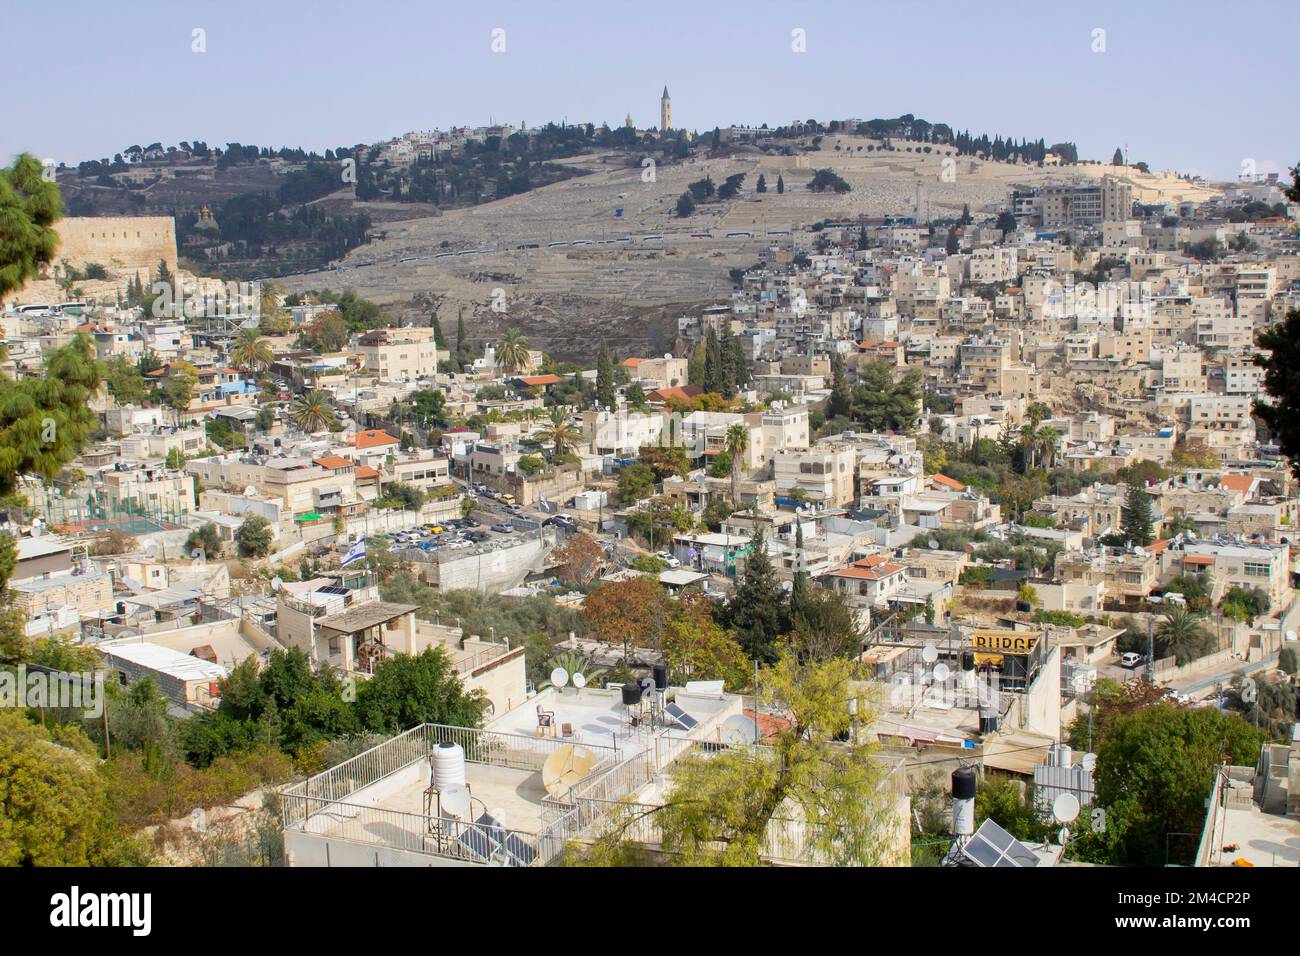 10 Nov 2022 The Mount of Olives at Jerusalem Israel viewed across the Valley of Hinnom from the traditional site of Caiaphas' Palace where Jesus was d Stock Photo